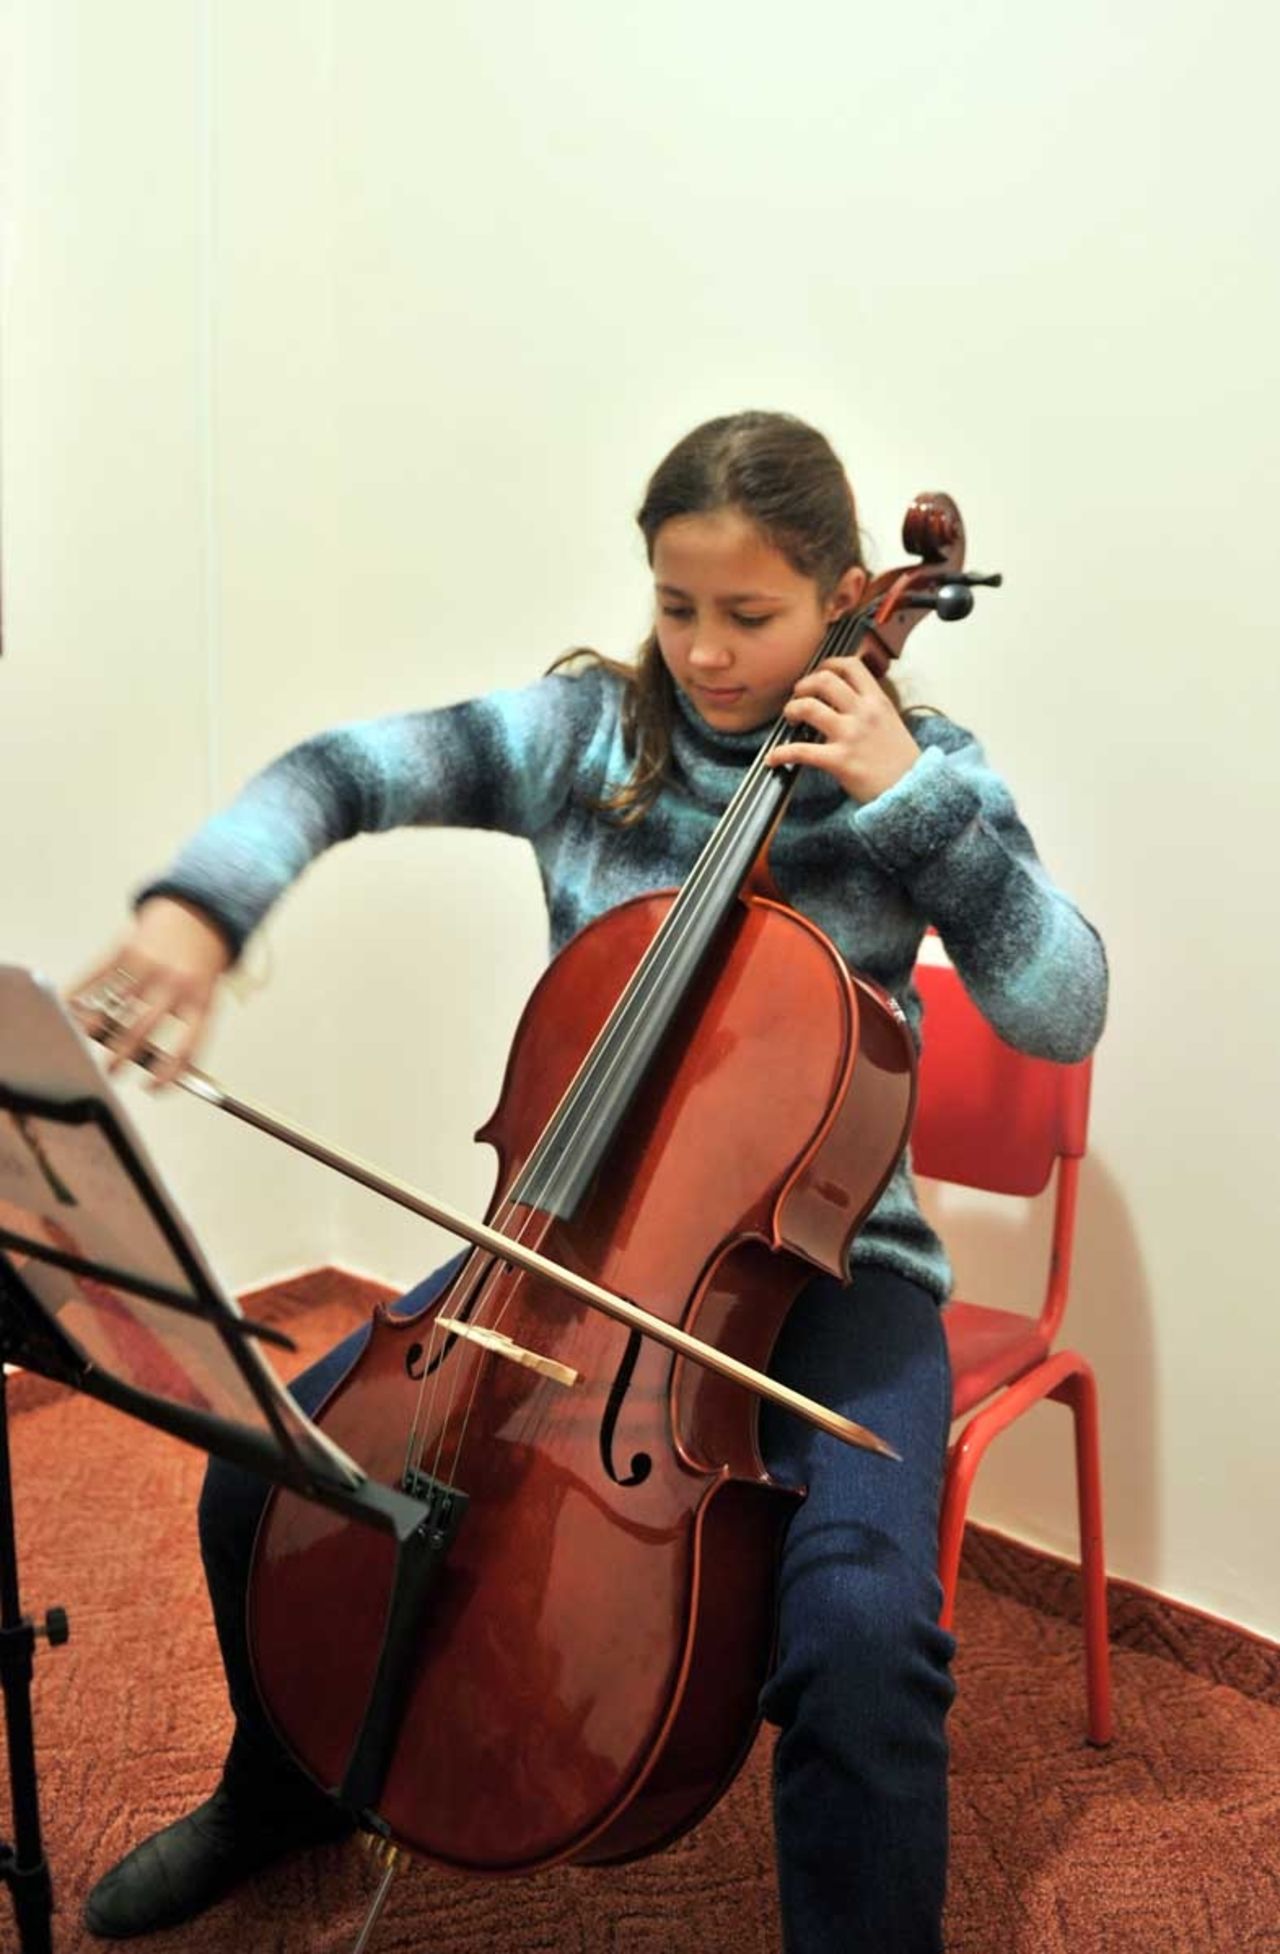  A cello student  practising. Cello is one of the Western Classical instrument taught at Gaza Music School. 